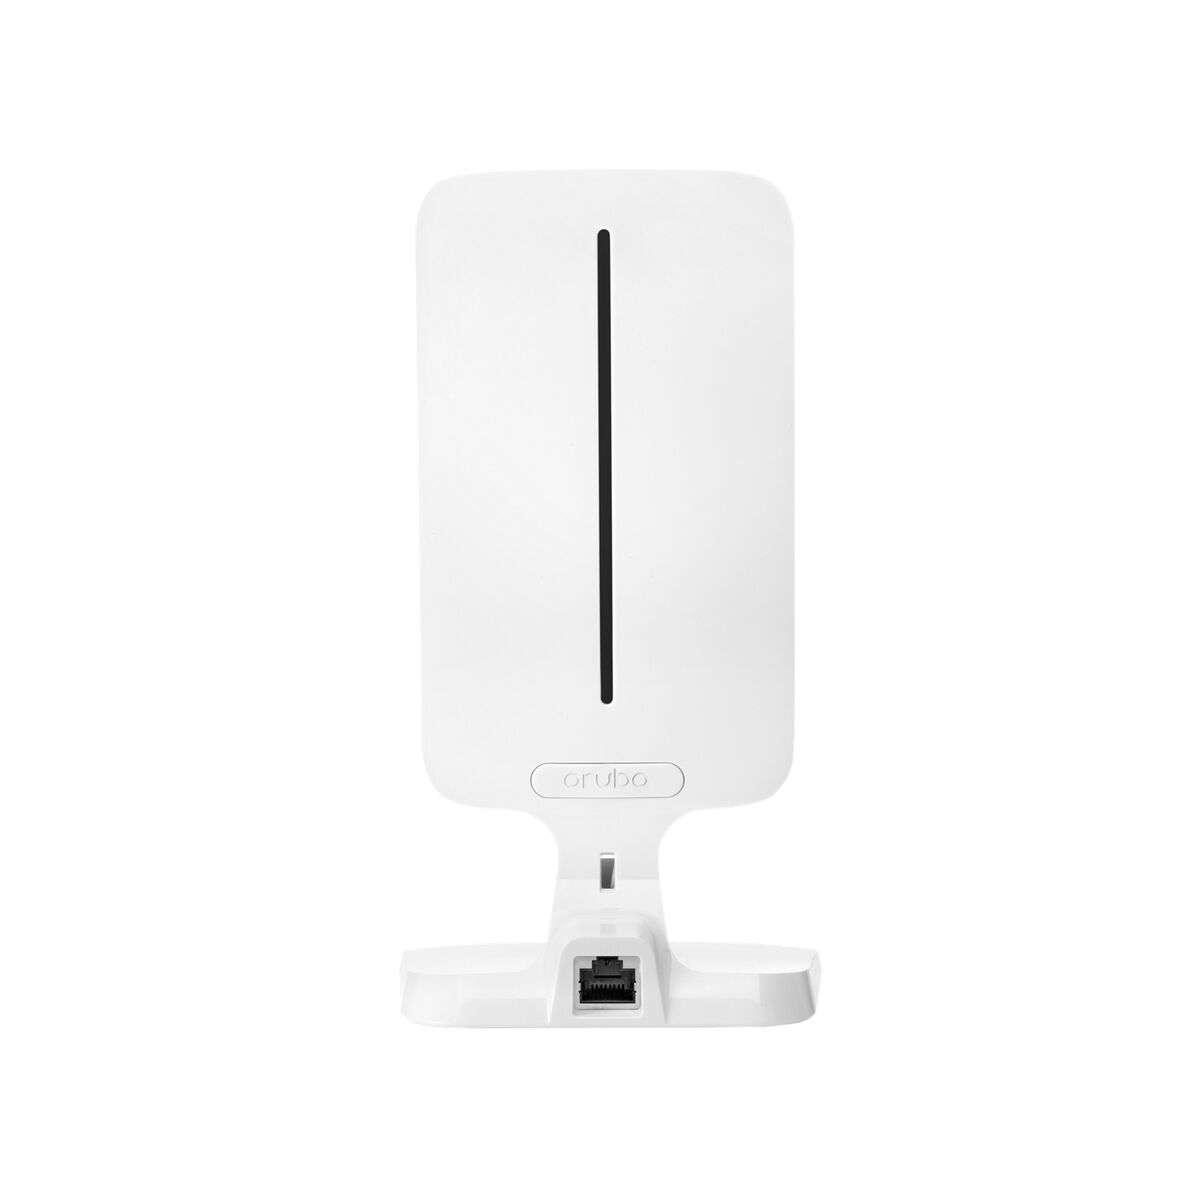 Access point HPE S1U81A White, HPE, Computing, Network devices, access-point-hpe-s1u81a-white, Brand_HPE, category-reference-2609, category-reference-2803, category-reference-2820, category-reference-t-19685, category-reference-t-19914, category-reference-t-21369, Condition_NEW, networks/wiring, Price_+ 1000, Teleworking, RiotNook